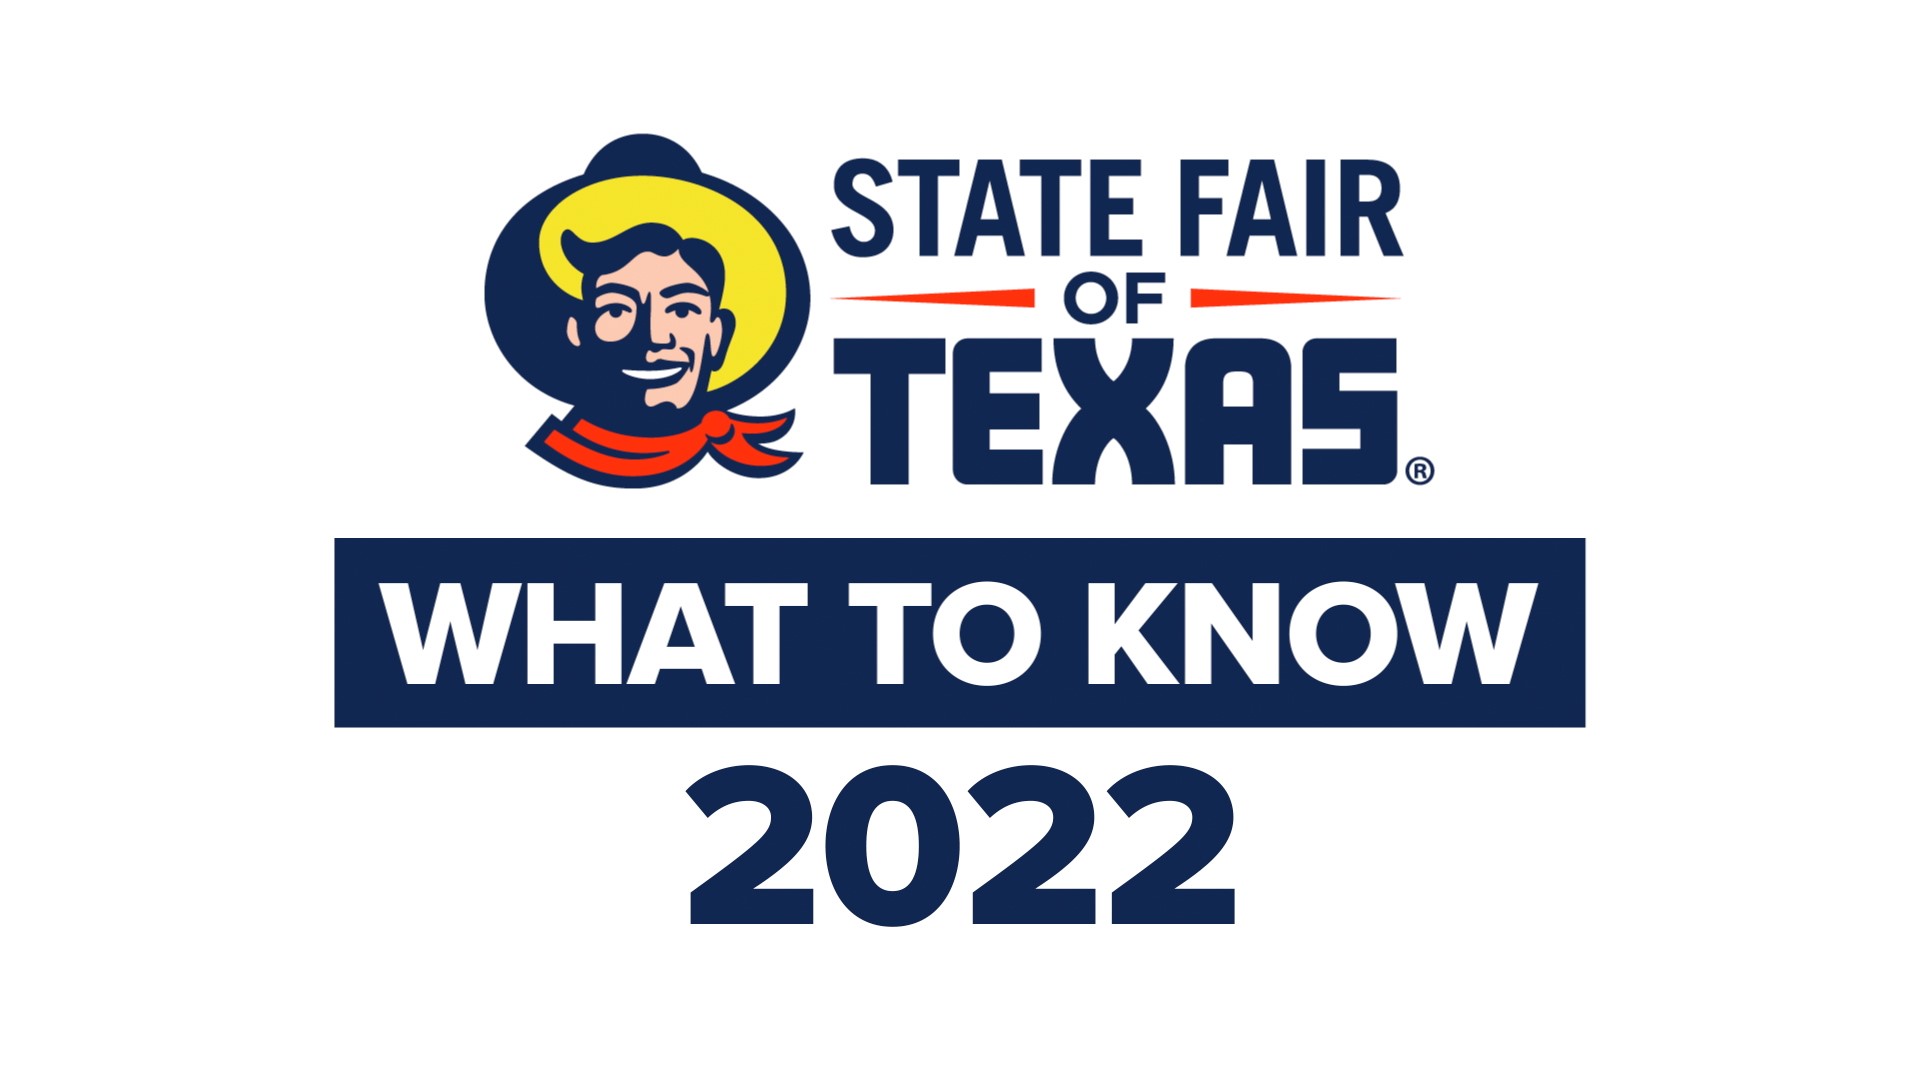 Everything you need to know before you head out to the State Fair of Texas in 2022.